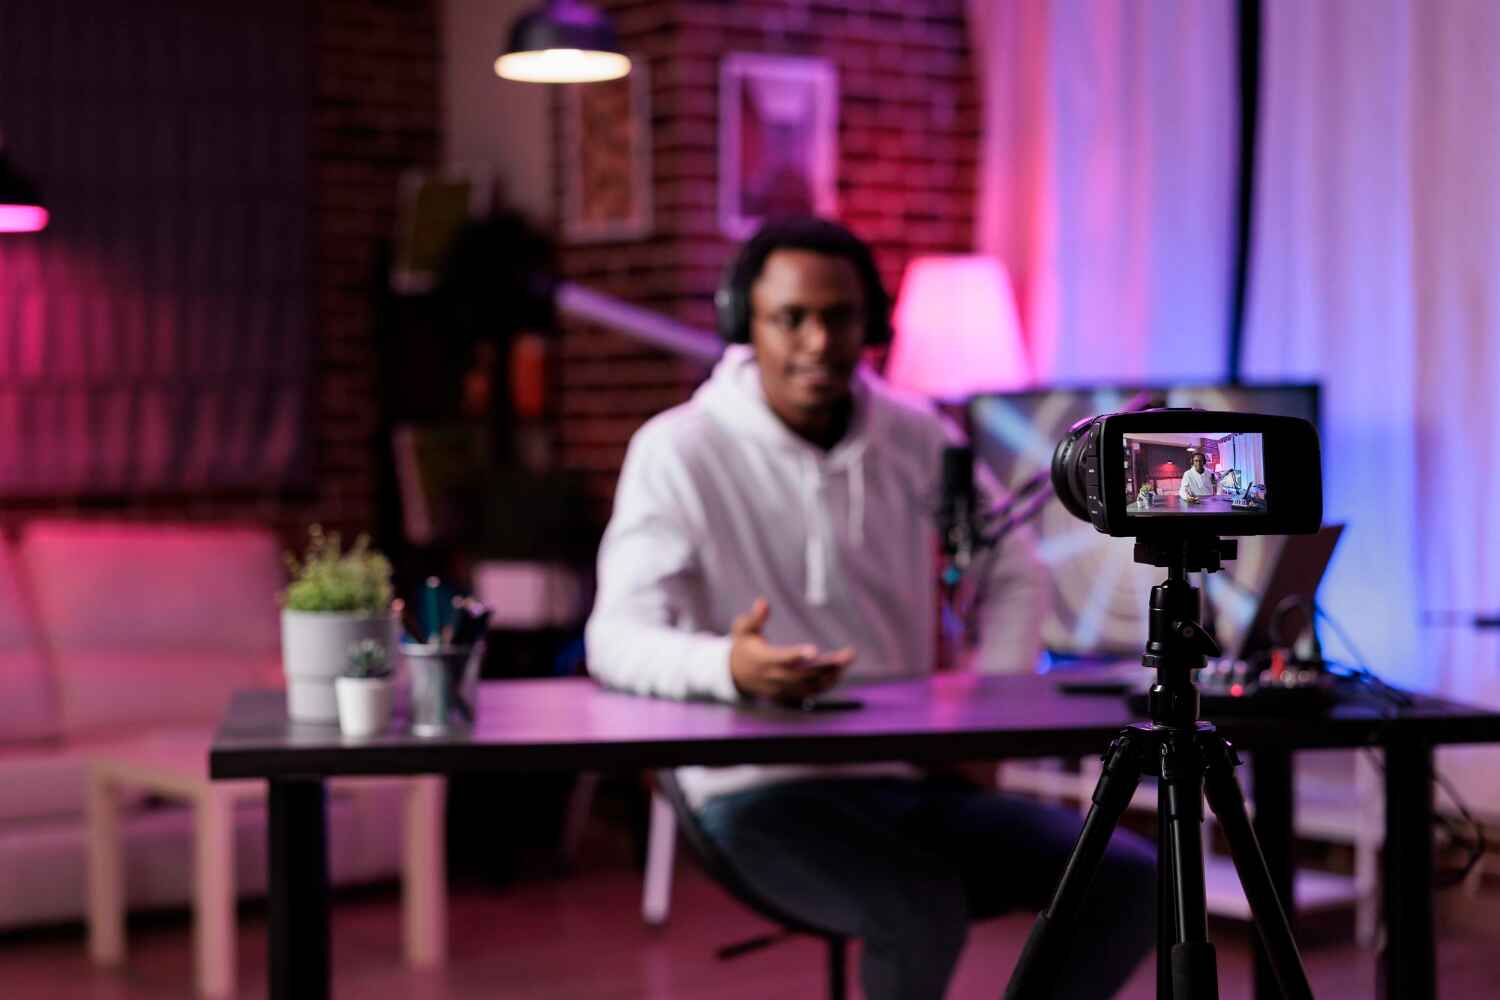 A person is seated at a desk in a warmly lit room, speaking into a microphone about how to make money on YouTube, and wearing headphones. They are being recorded by a camera on a tripod. Various items, including a plant and stationery, are on the desk, with blurred background decor visible. | MONEY6X